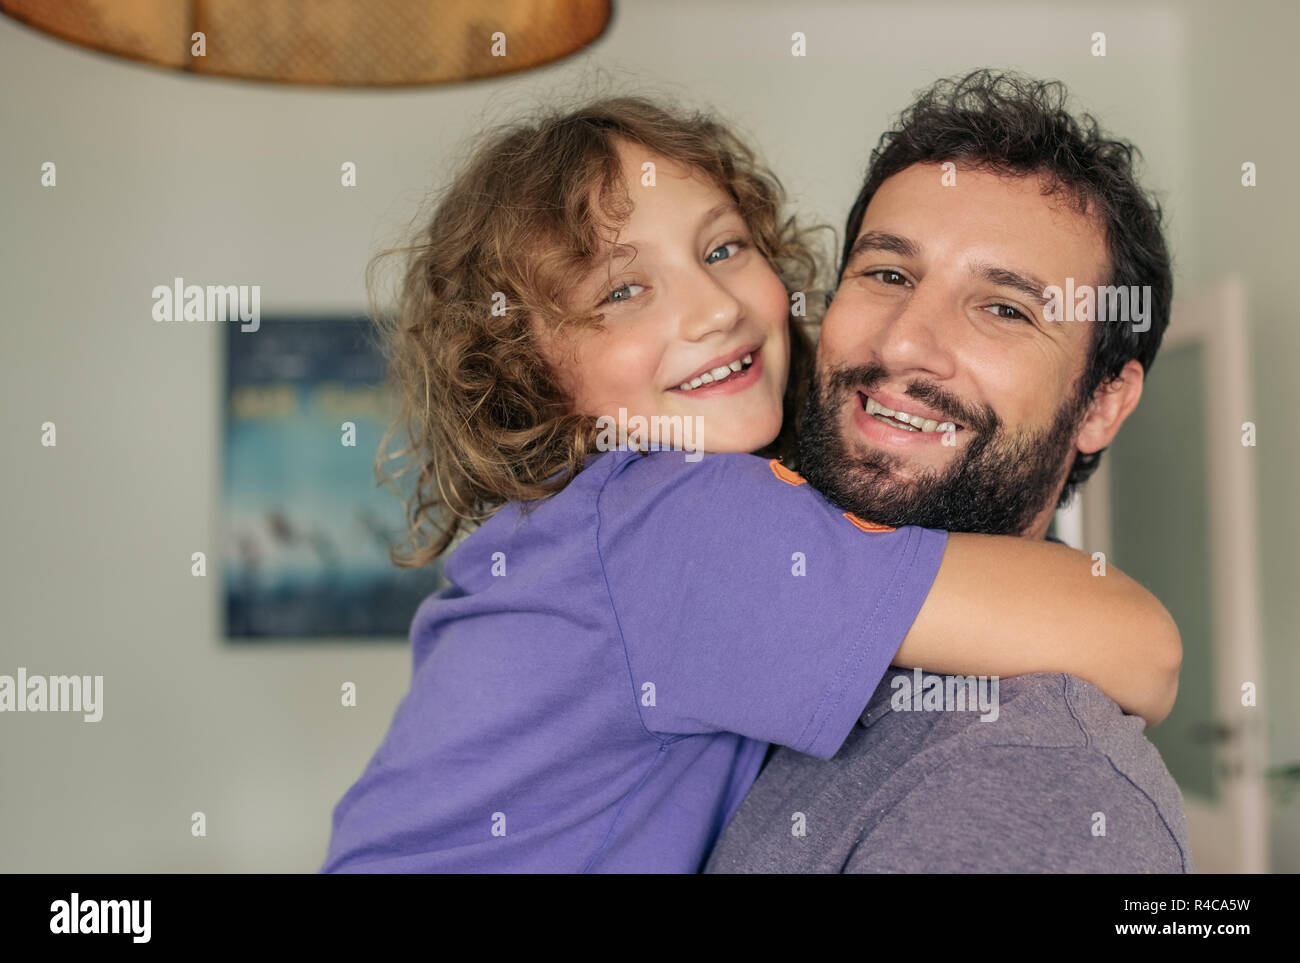 Content dad holding his son in his arms at home Stock Photo